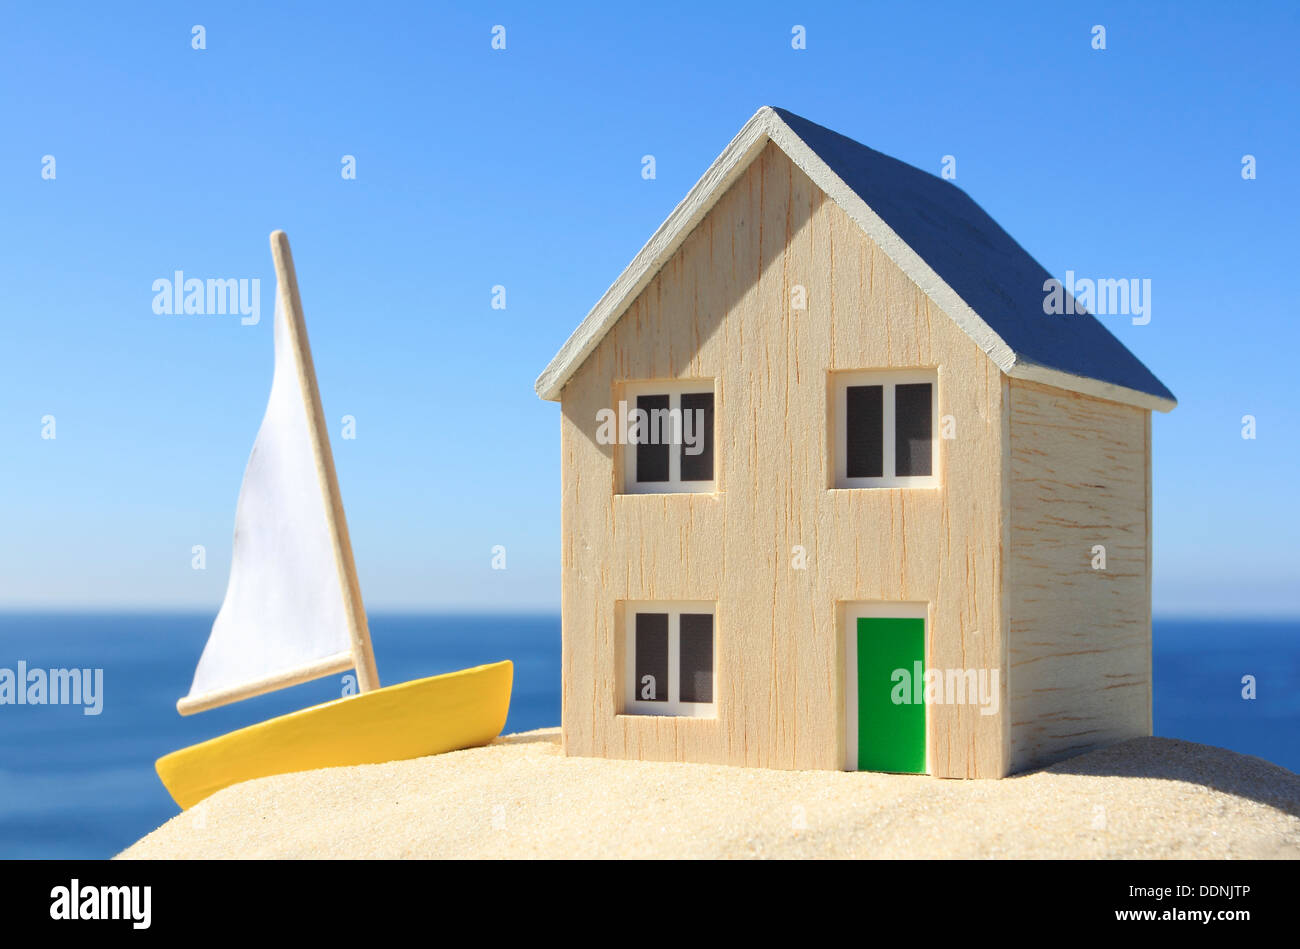 Model house and boat by the ocean Stock Photo